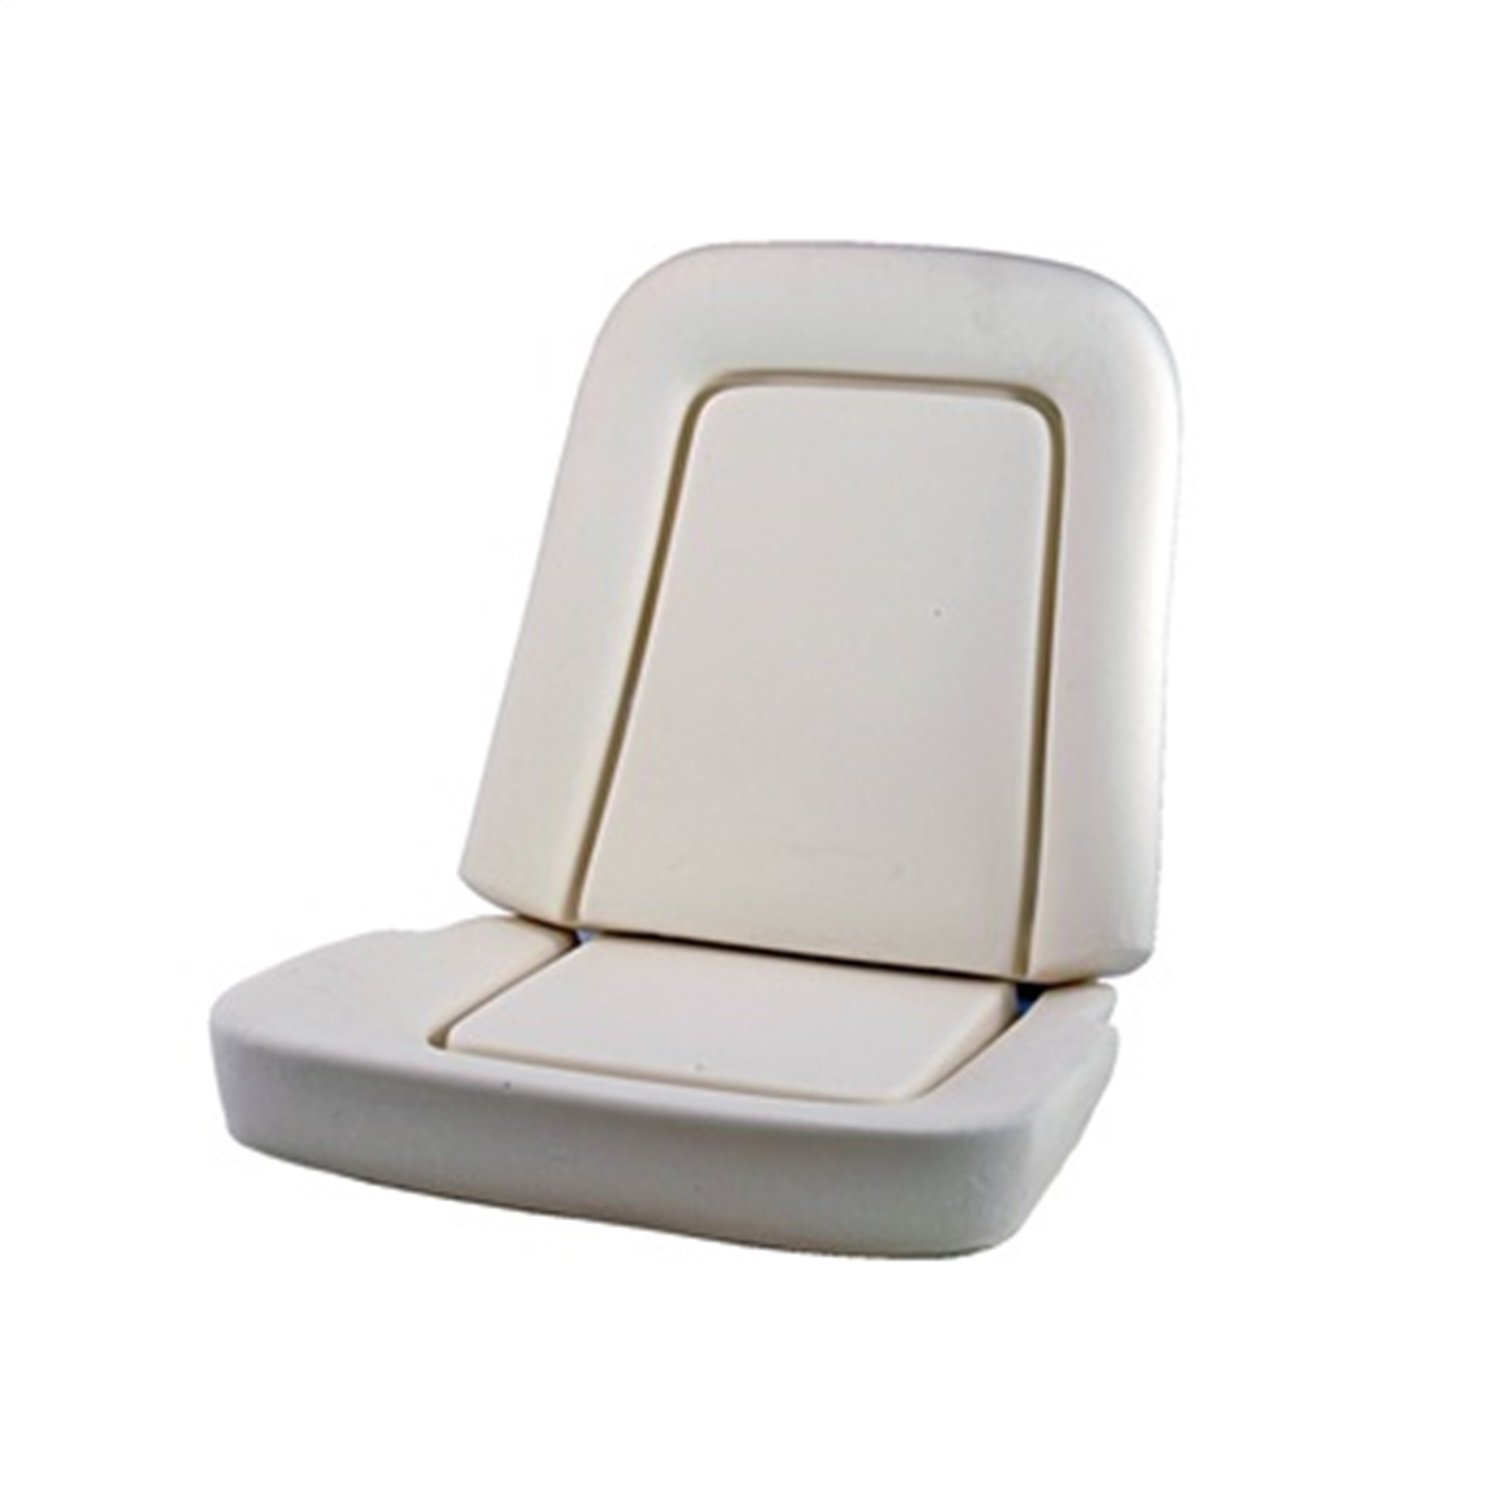 64-66 SEAT CUSHIONS STAND